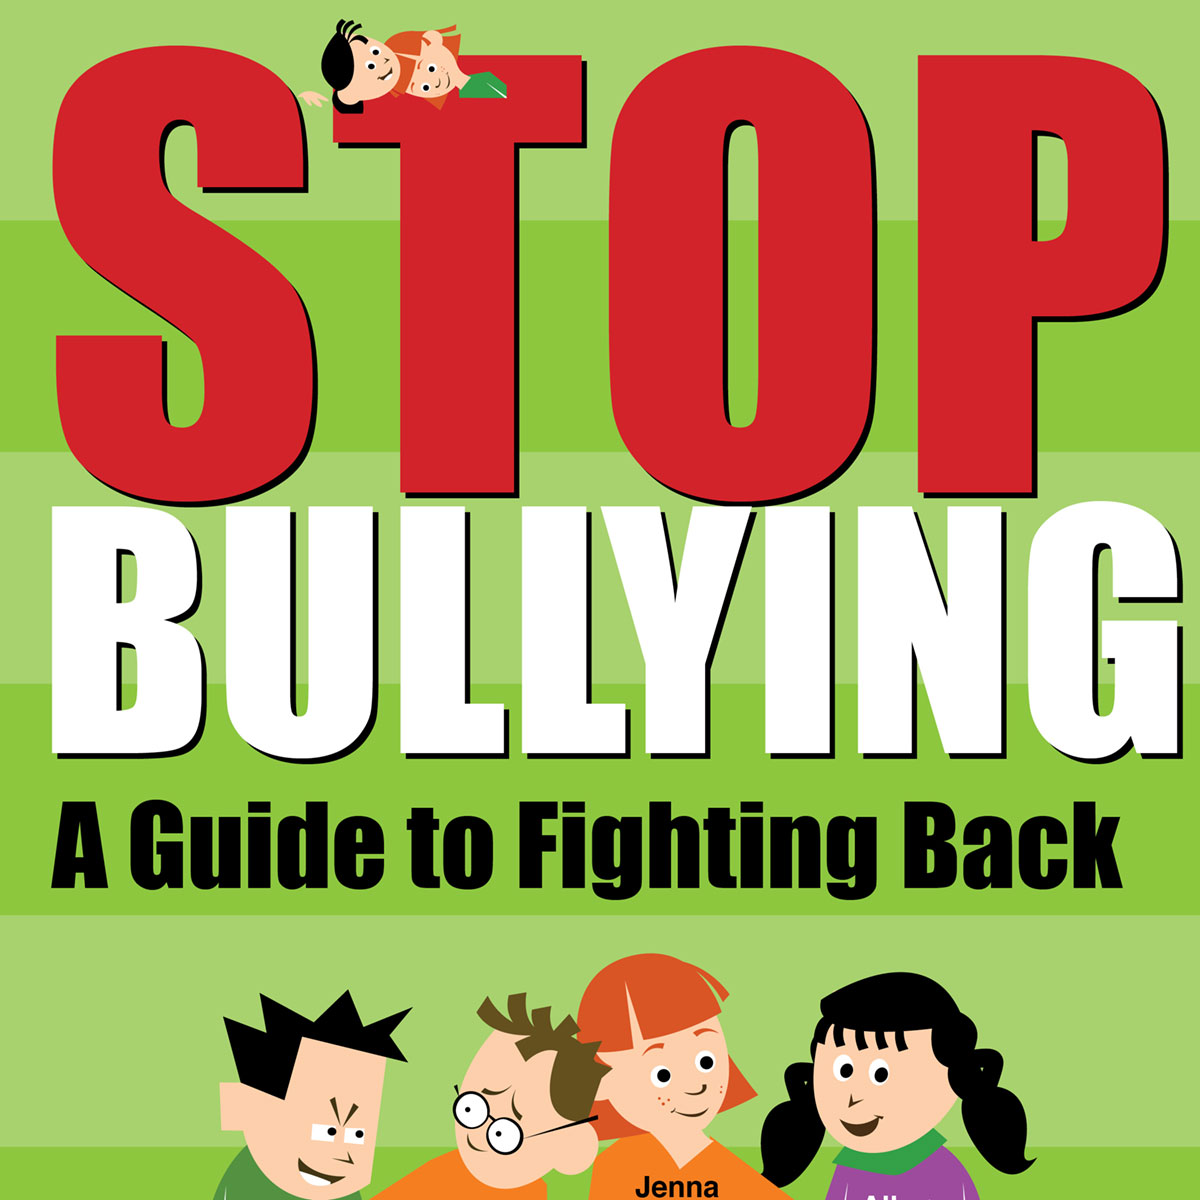 Stop Bullying! It's A Crime Punishable By Law! #stopthehate #stopbullying  #bekinnd